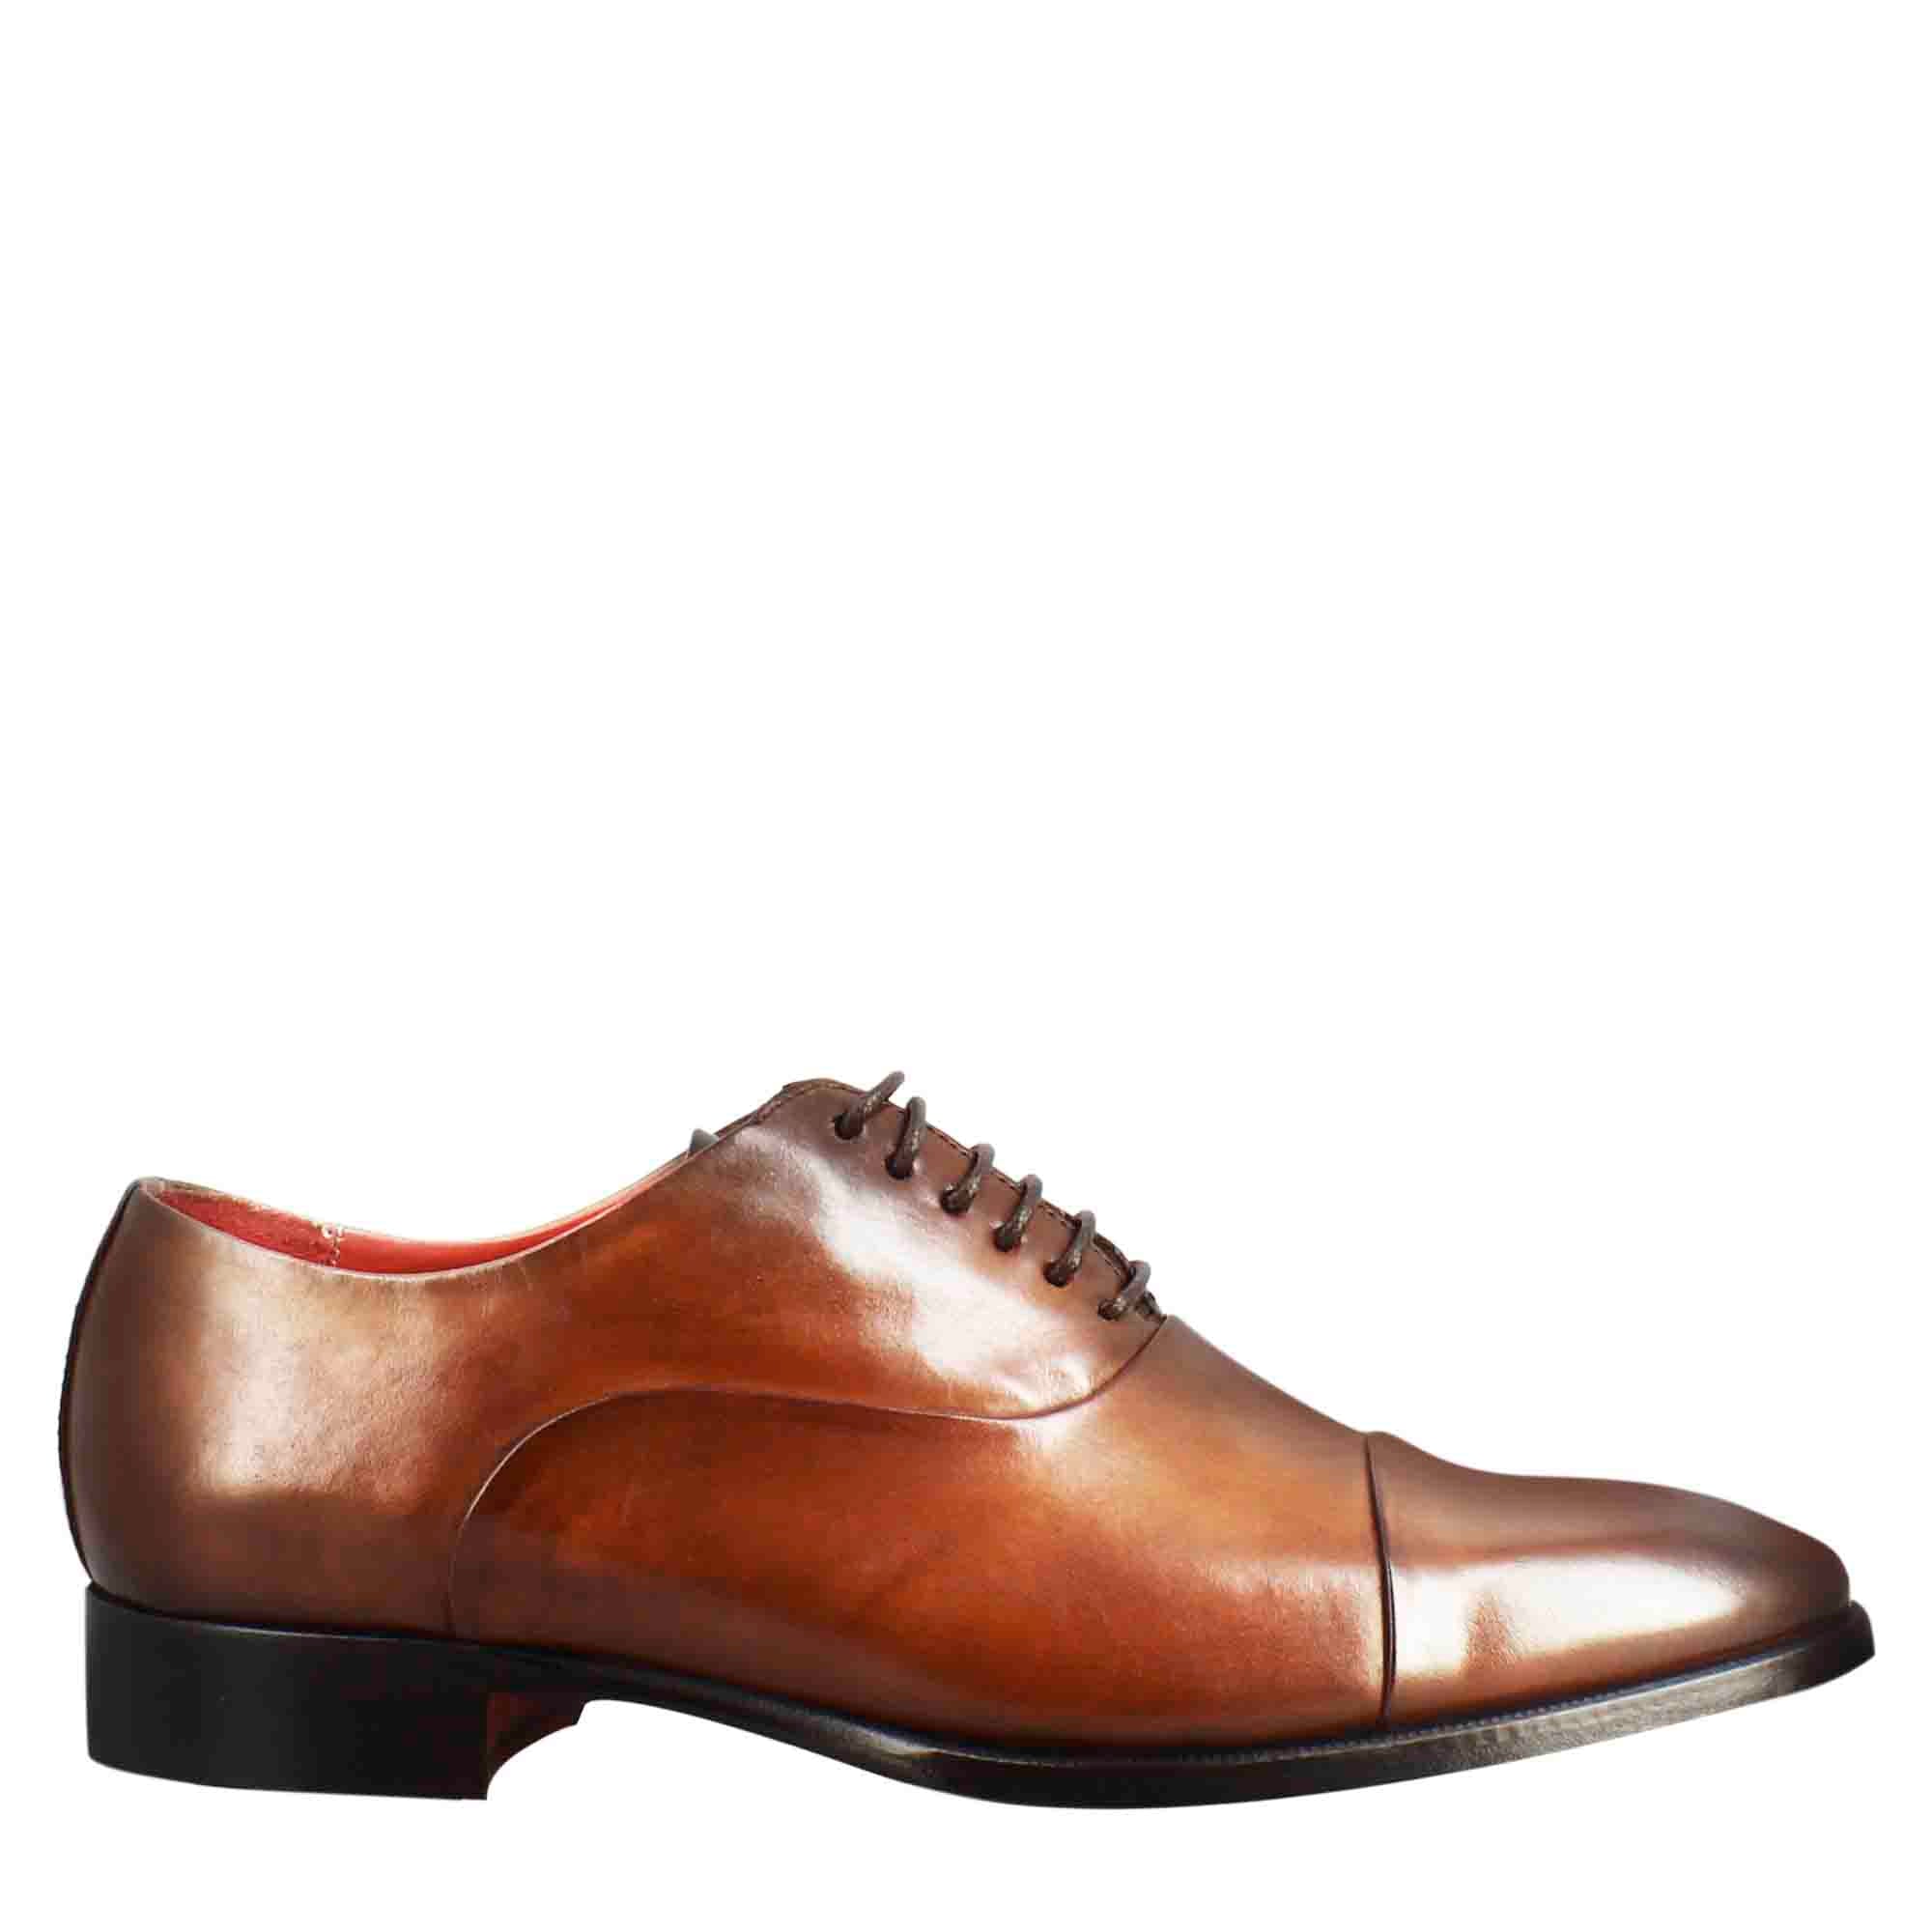 Brandy Oxford Shoes with Toe Cap